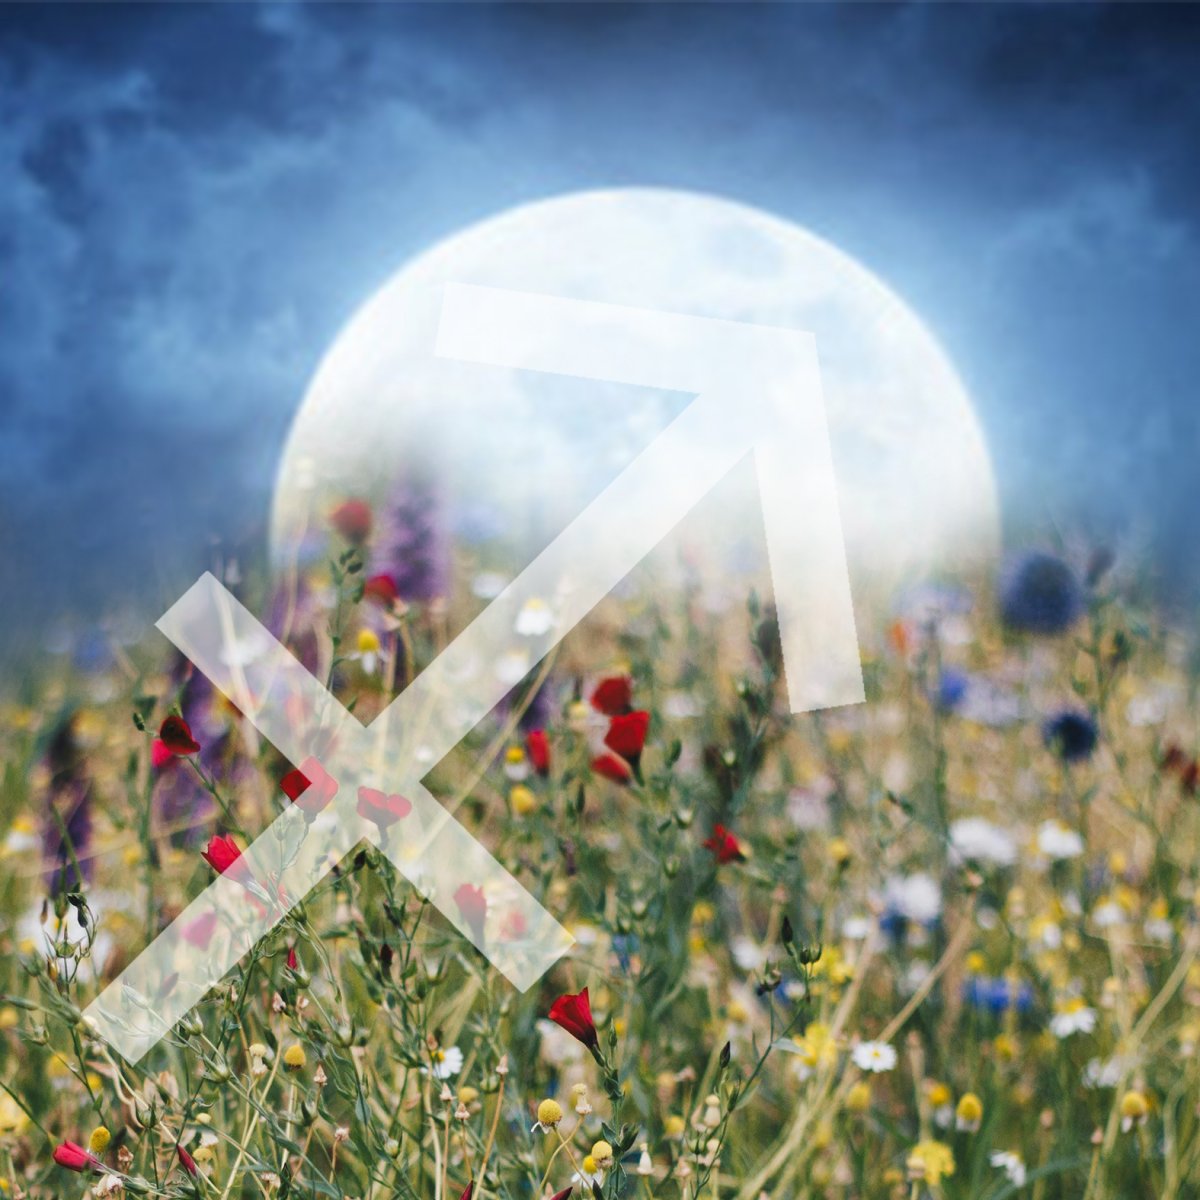 Welcome to the full Flower moon in Sagittarius on May 23 